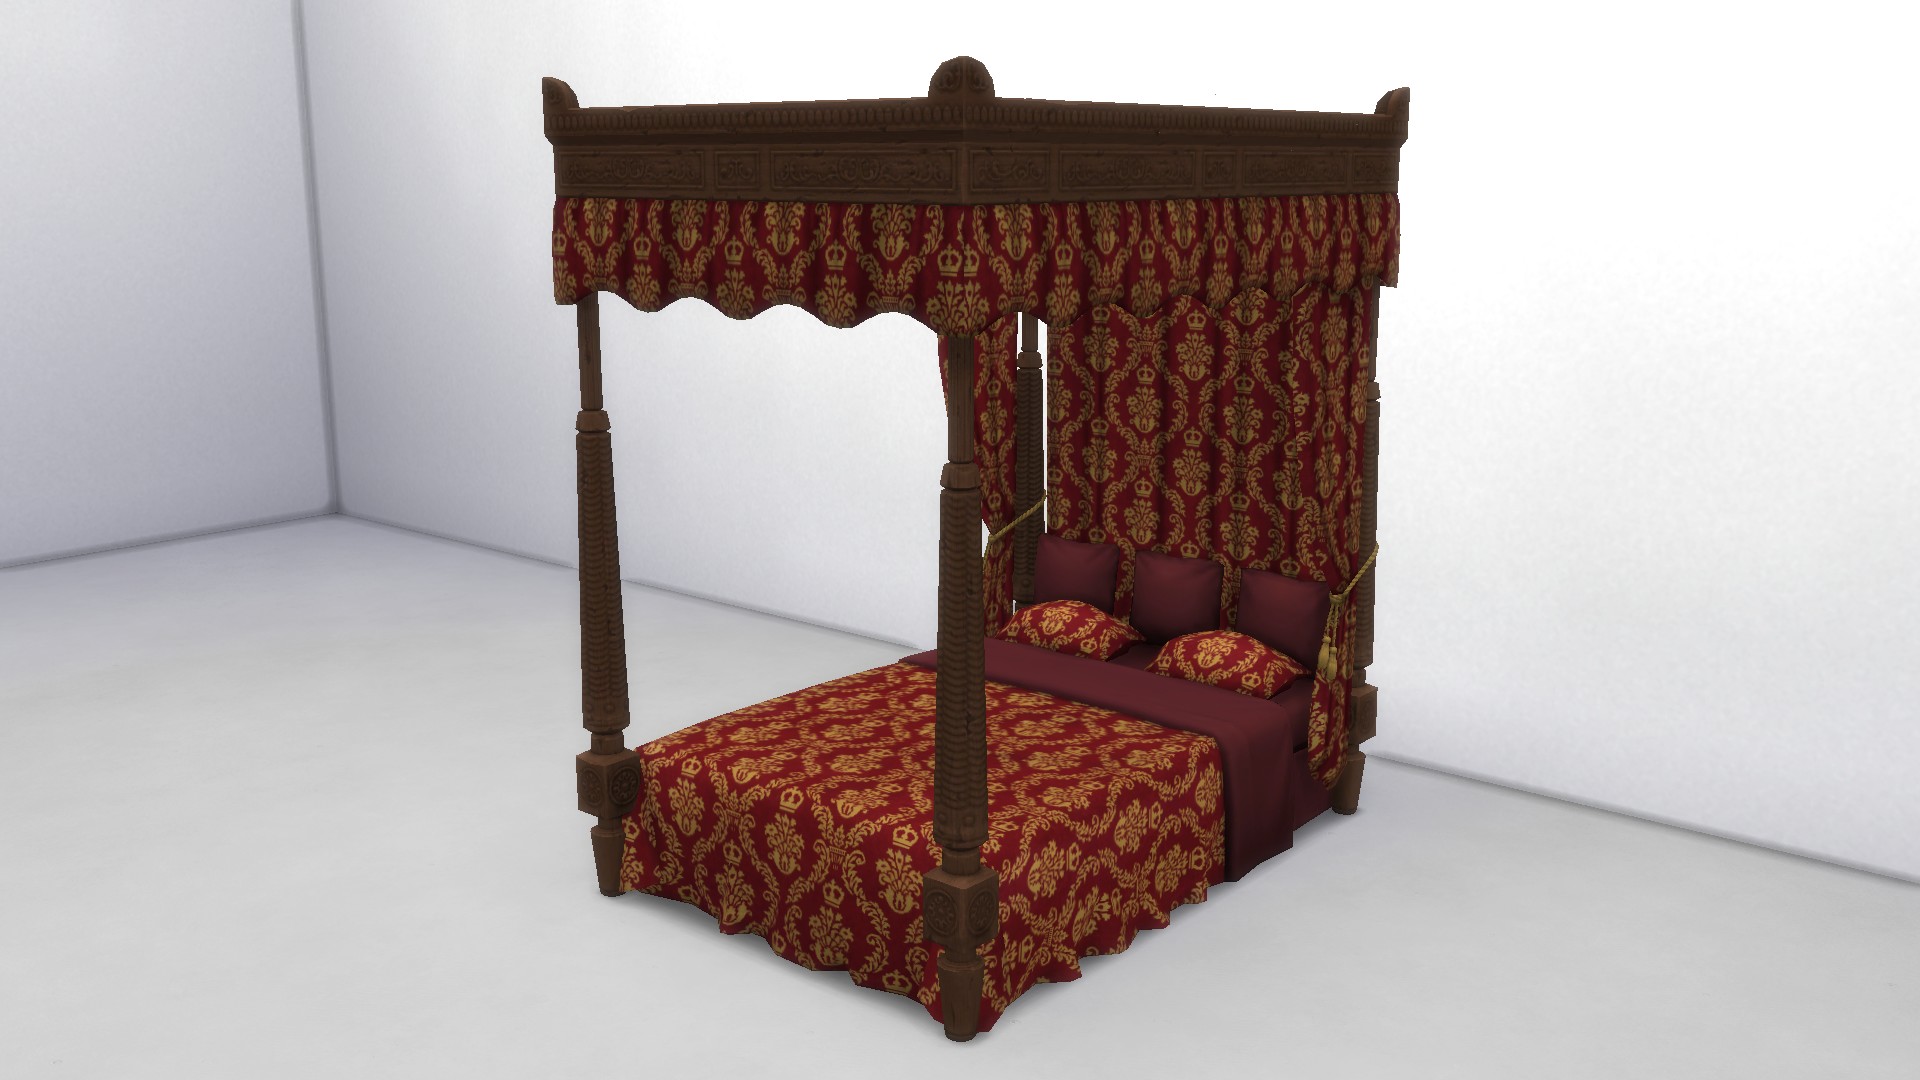 Mod The Sims Medieval Queen Bed, Medieval Bed Frame